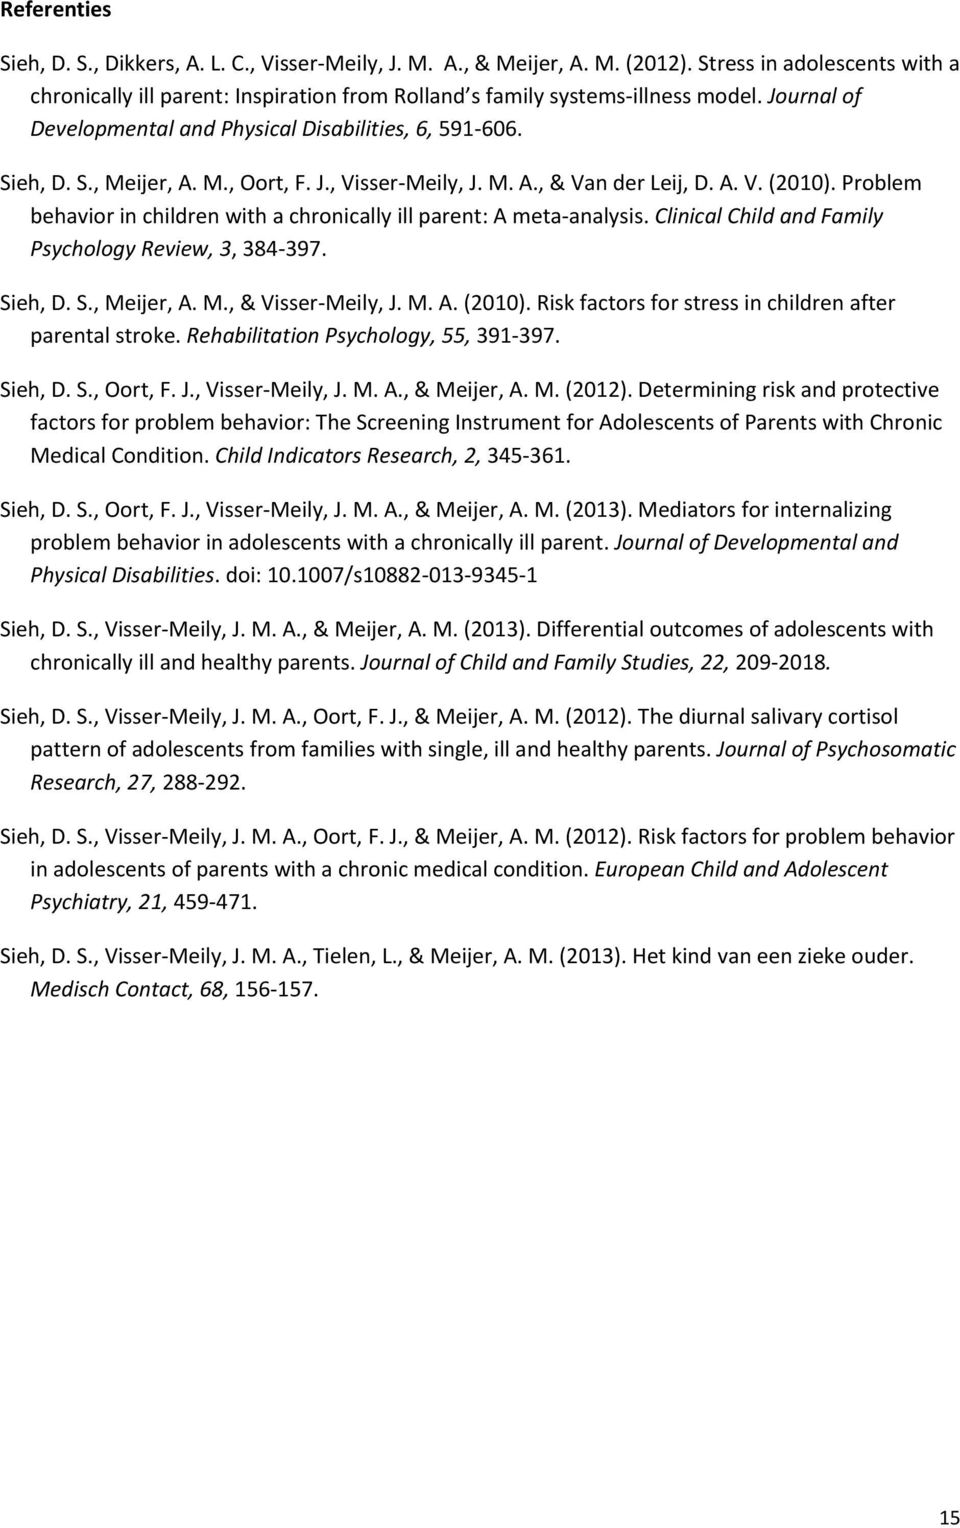 Prblem behavir in children with a chrnically ill parent: A meta analysis. Clinical Child and Family Psychlgy Review, 3, 384 397. Sieh, D. S., Meijer, A. M., & Visser Meily, J. M. A. (2010).